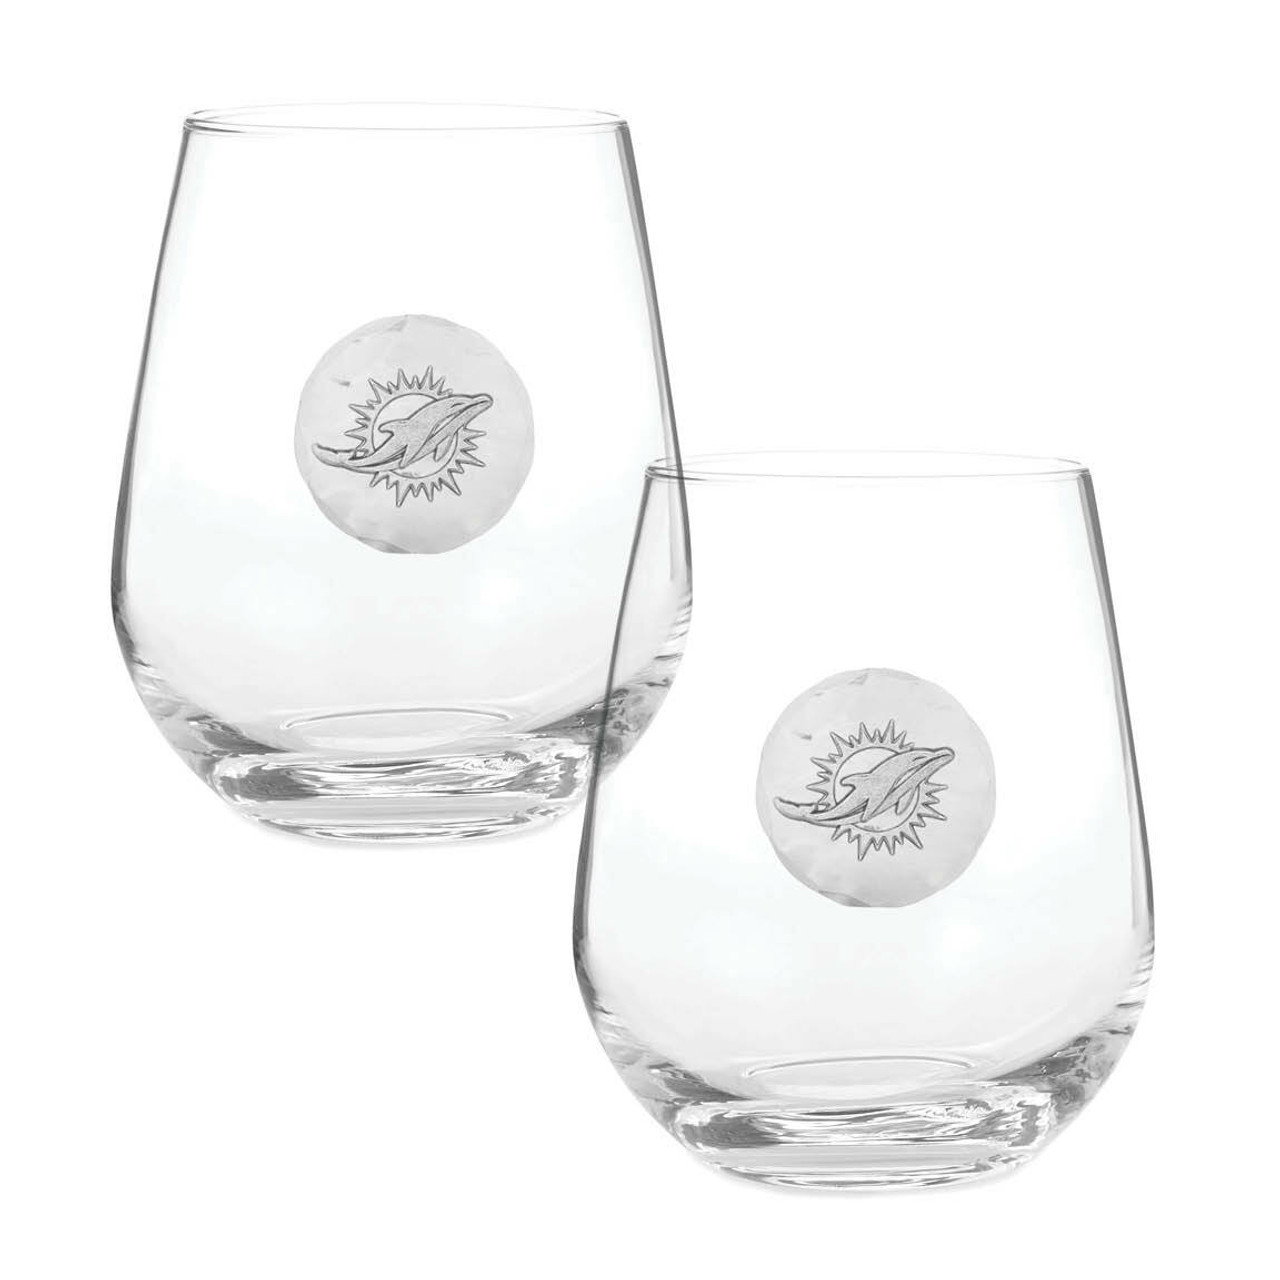 VINGLACE STEMLESS WINE GLASS - Magpies Gifts